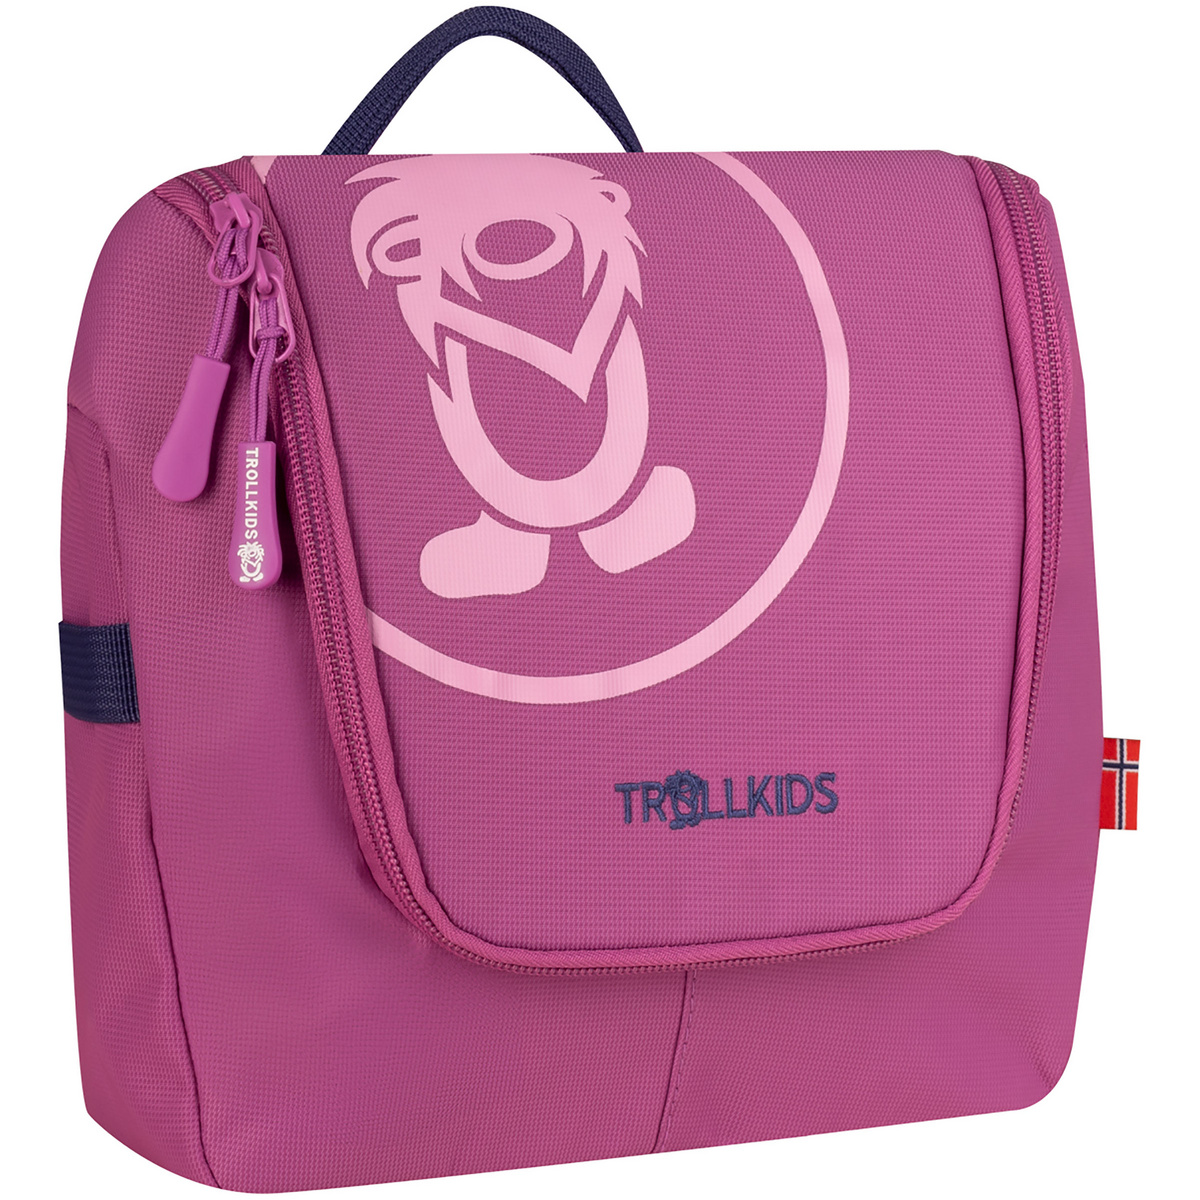 Image of Trollkids Bambino Necessaire